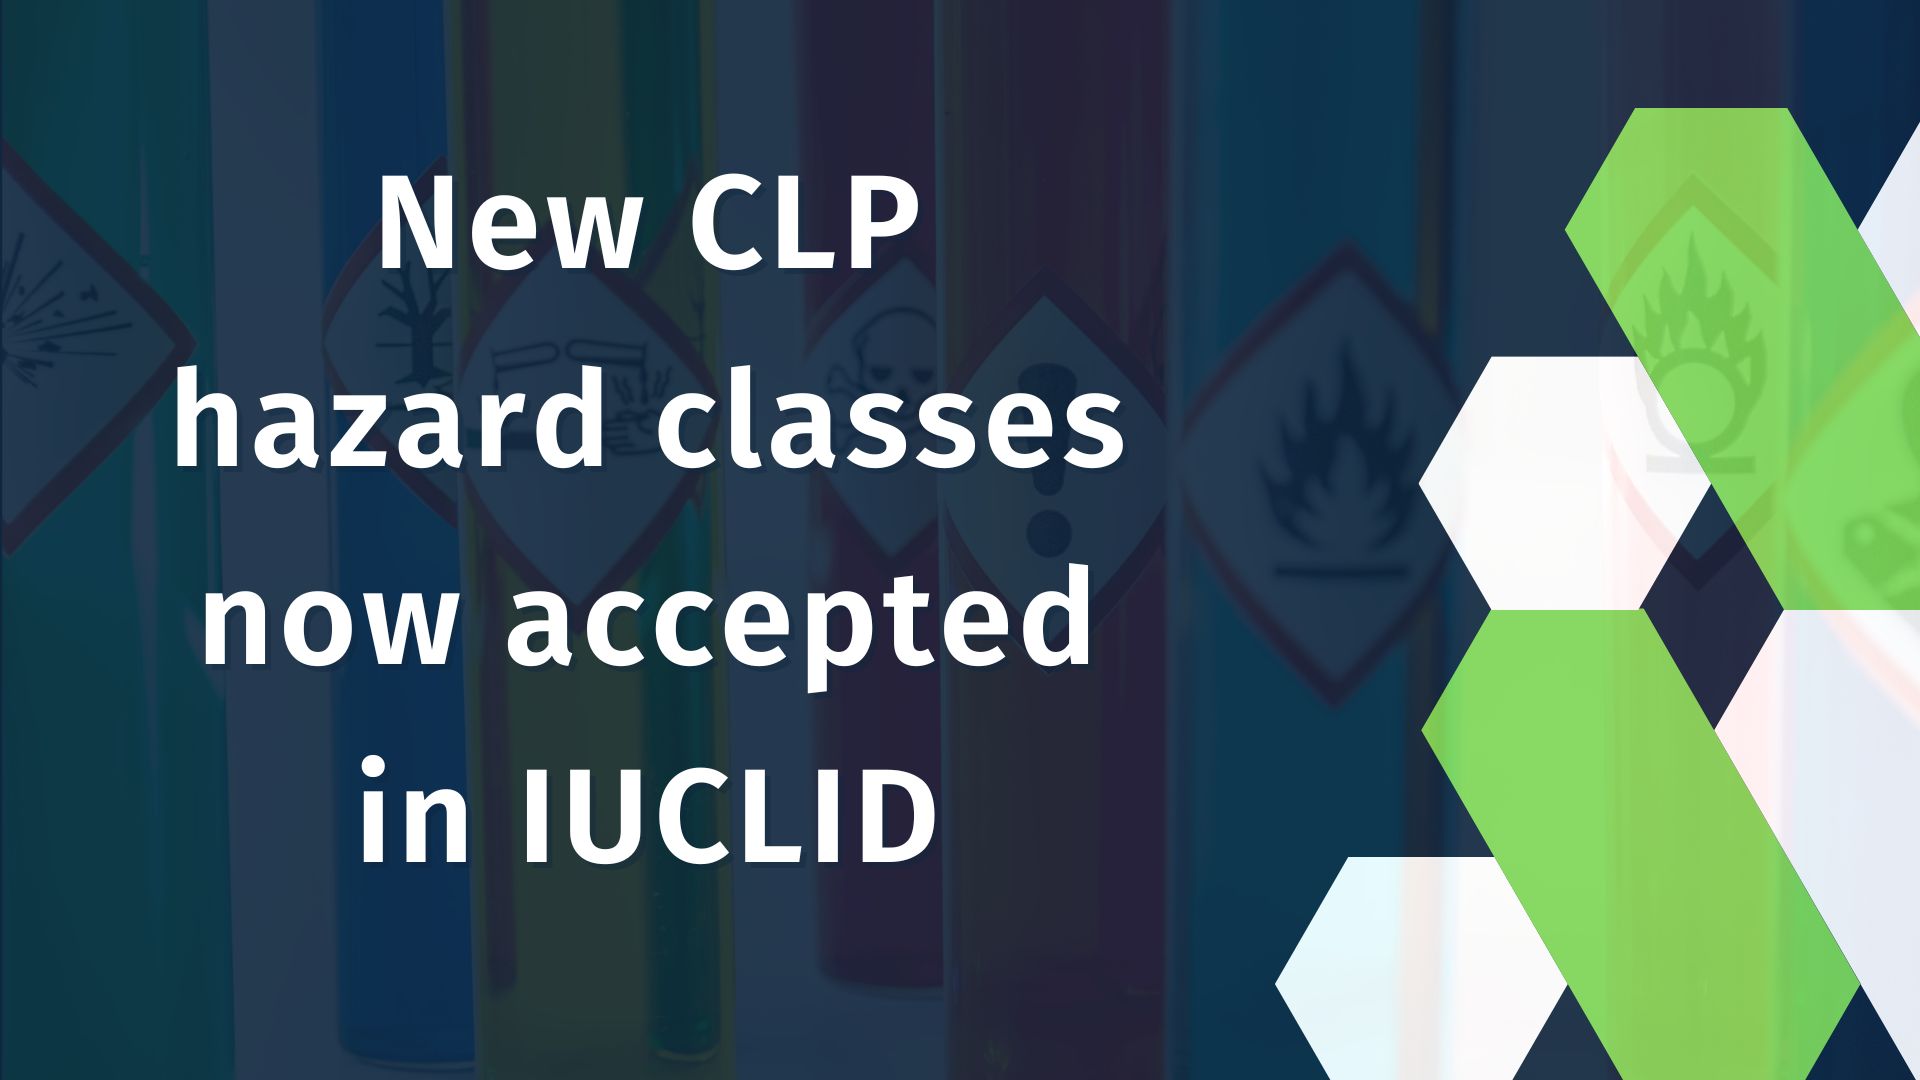 IUCLID now accepts new CLP hazard classes